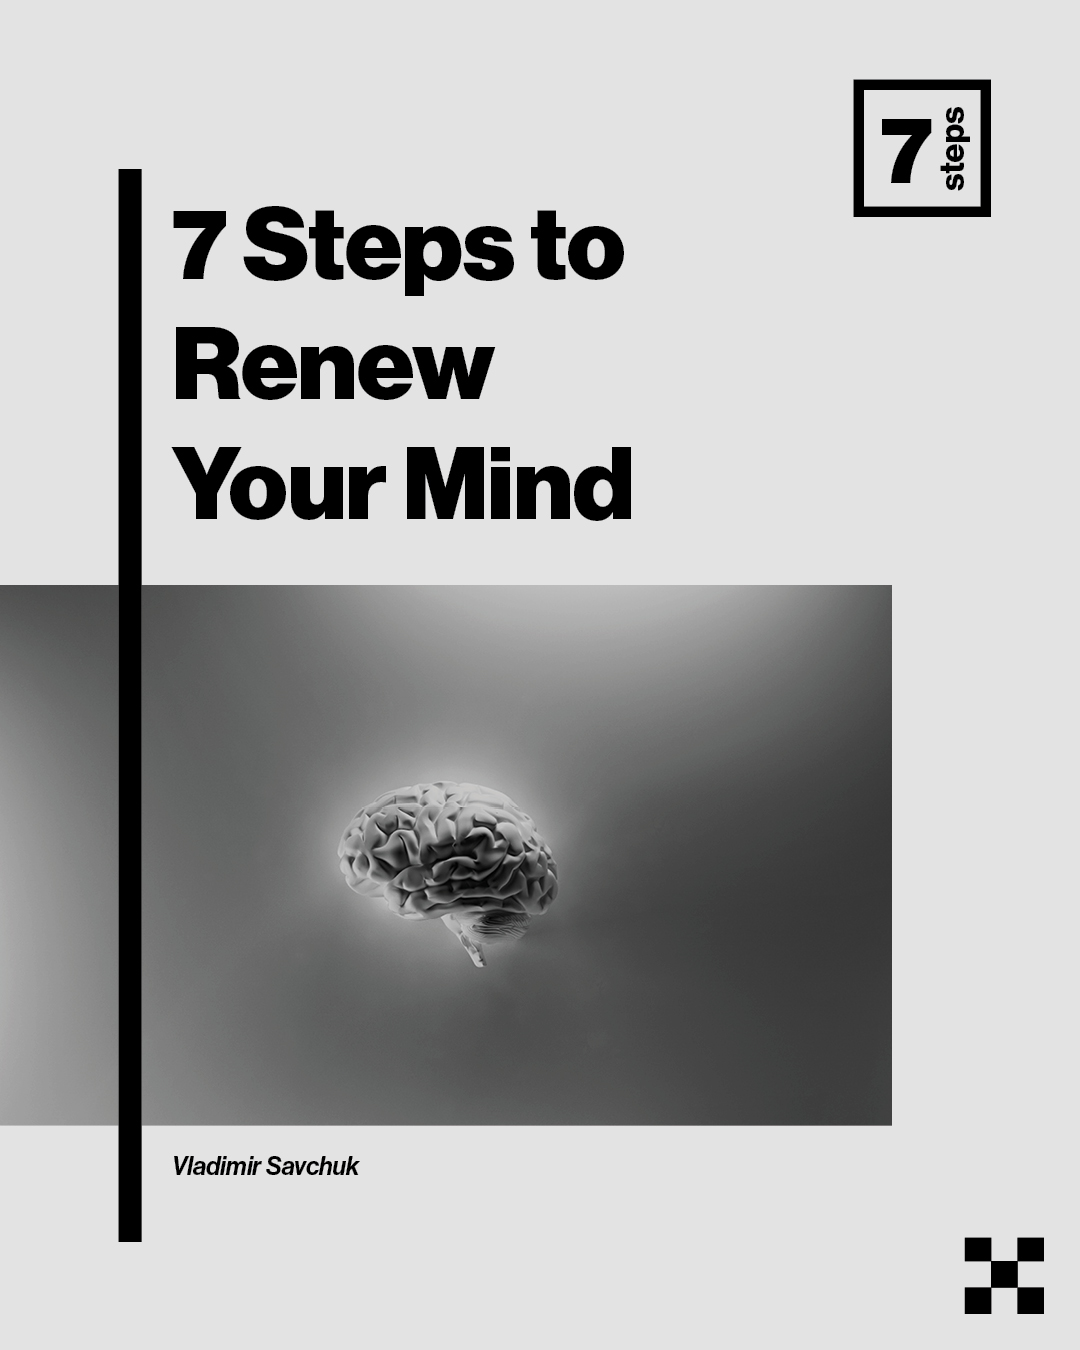 Featured Image for “7 Steps to Renew Your Mind”